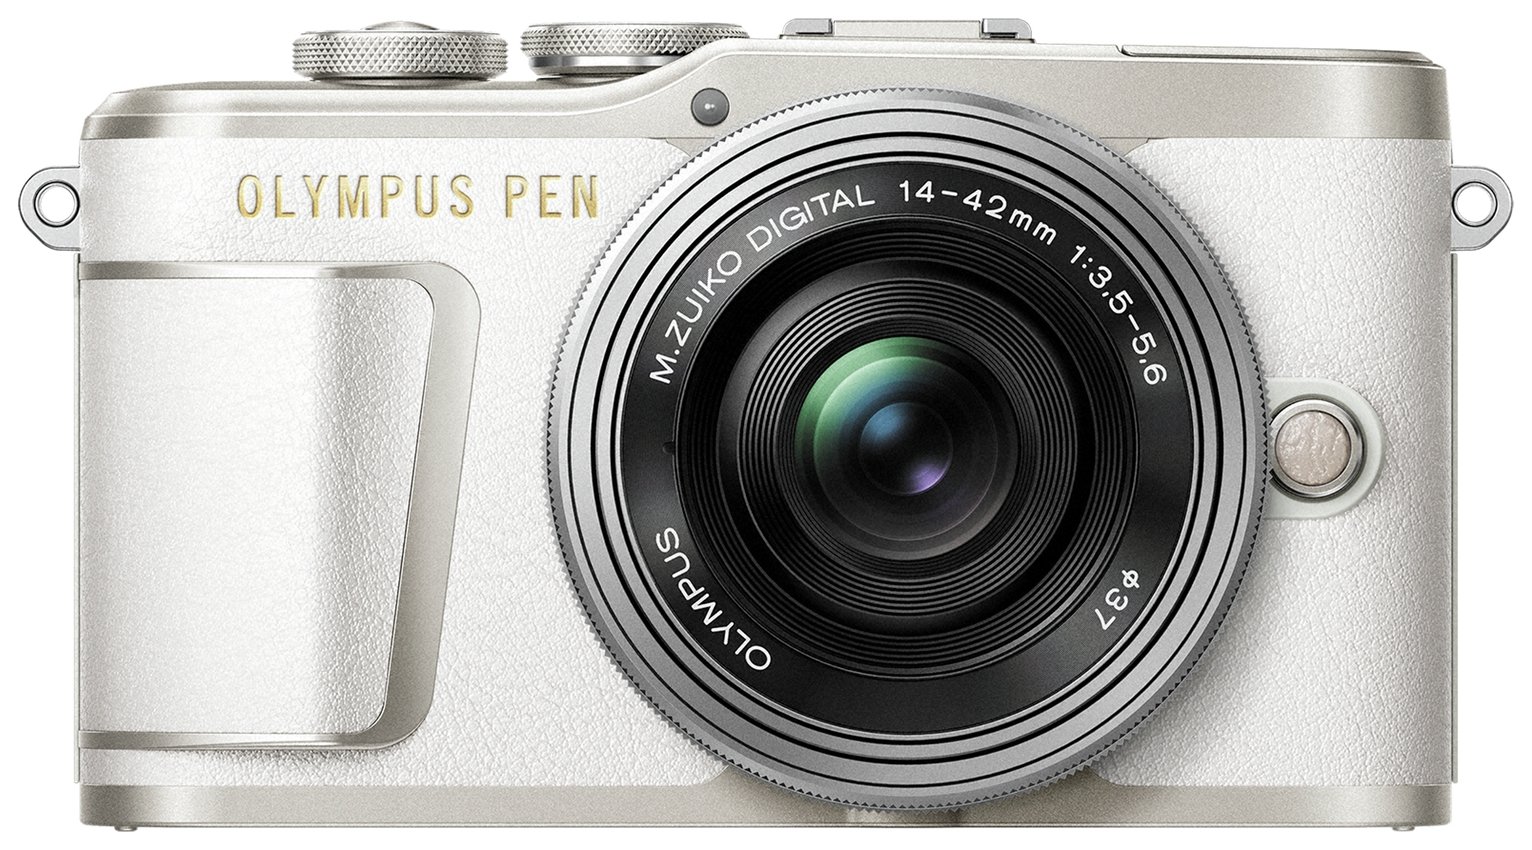 Olympus Pen E-PL9 Mirrorless Camera With 14-42mm Lens Review